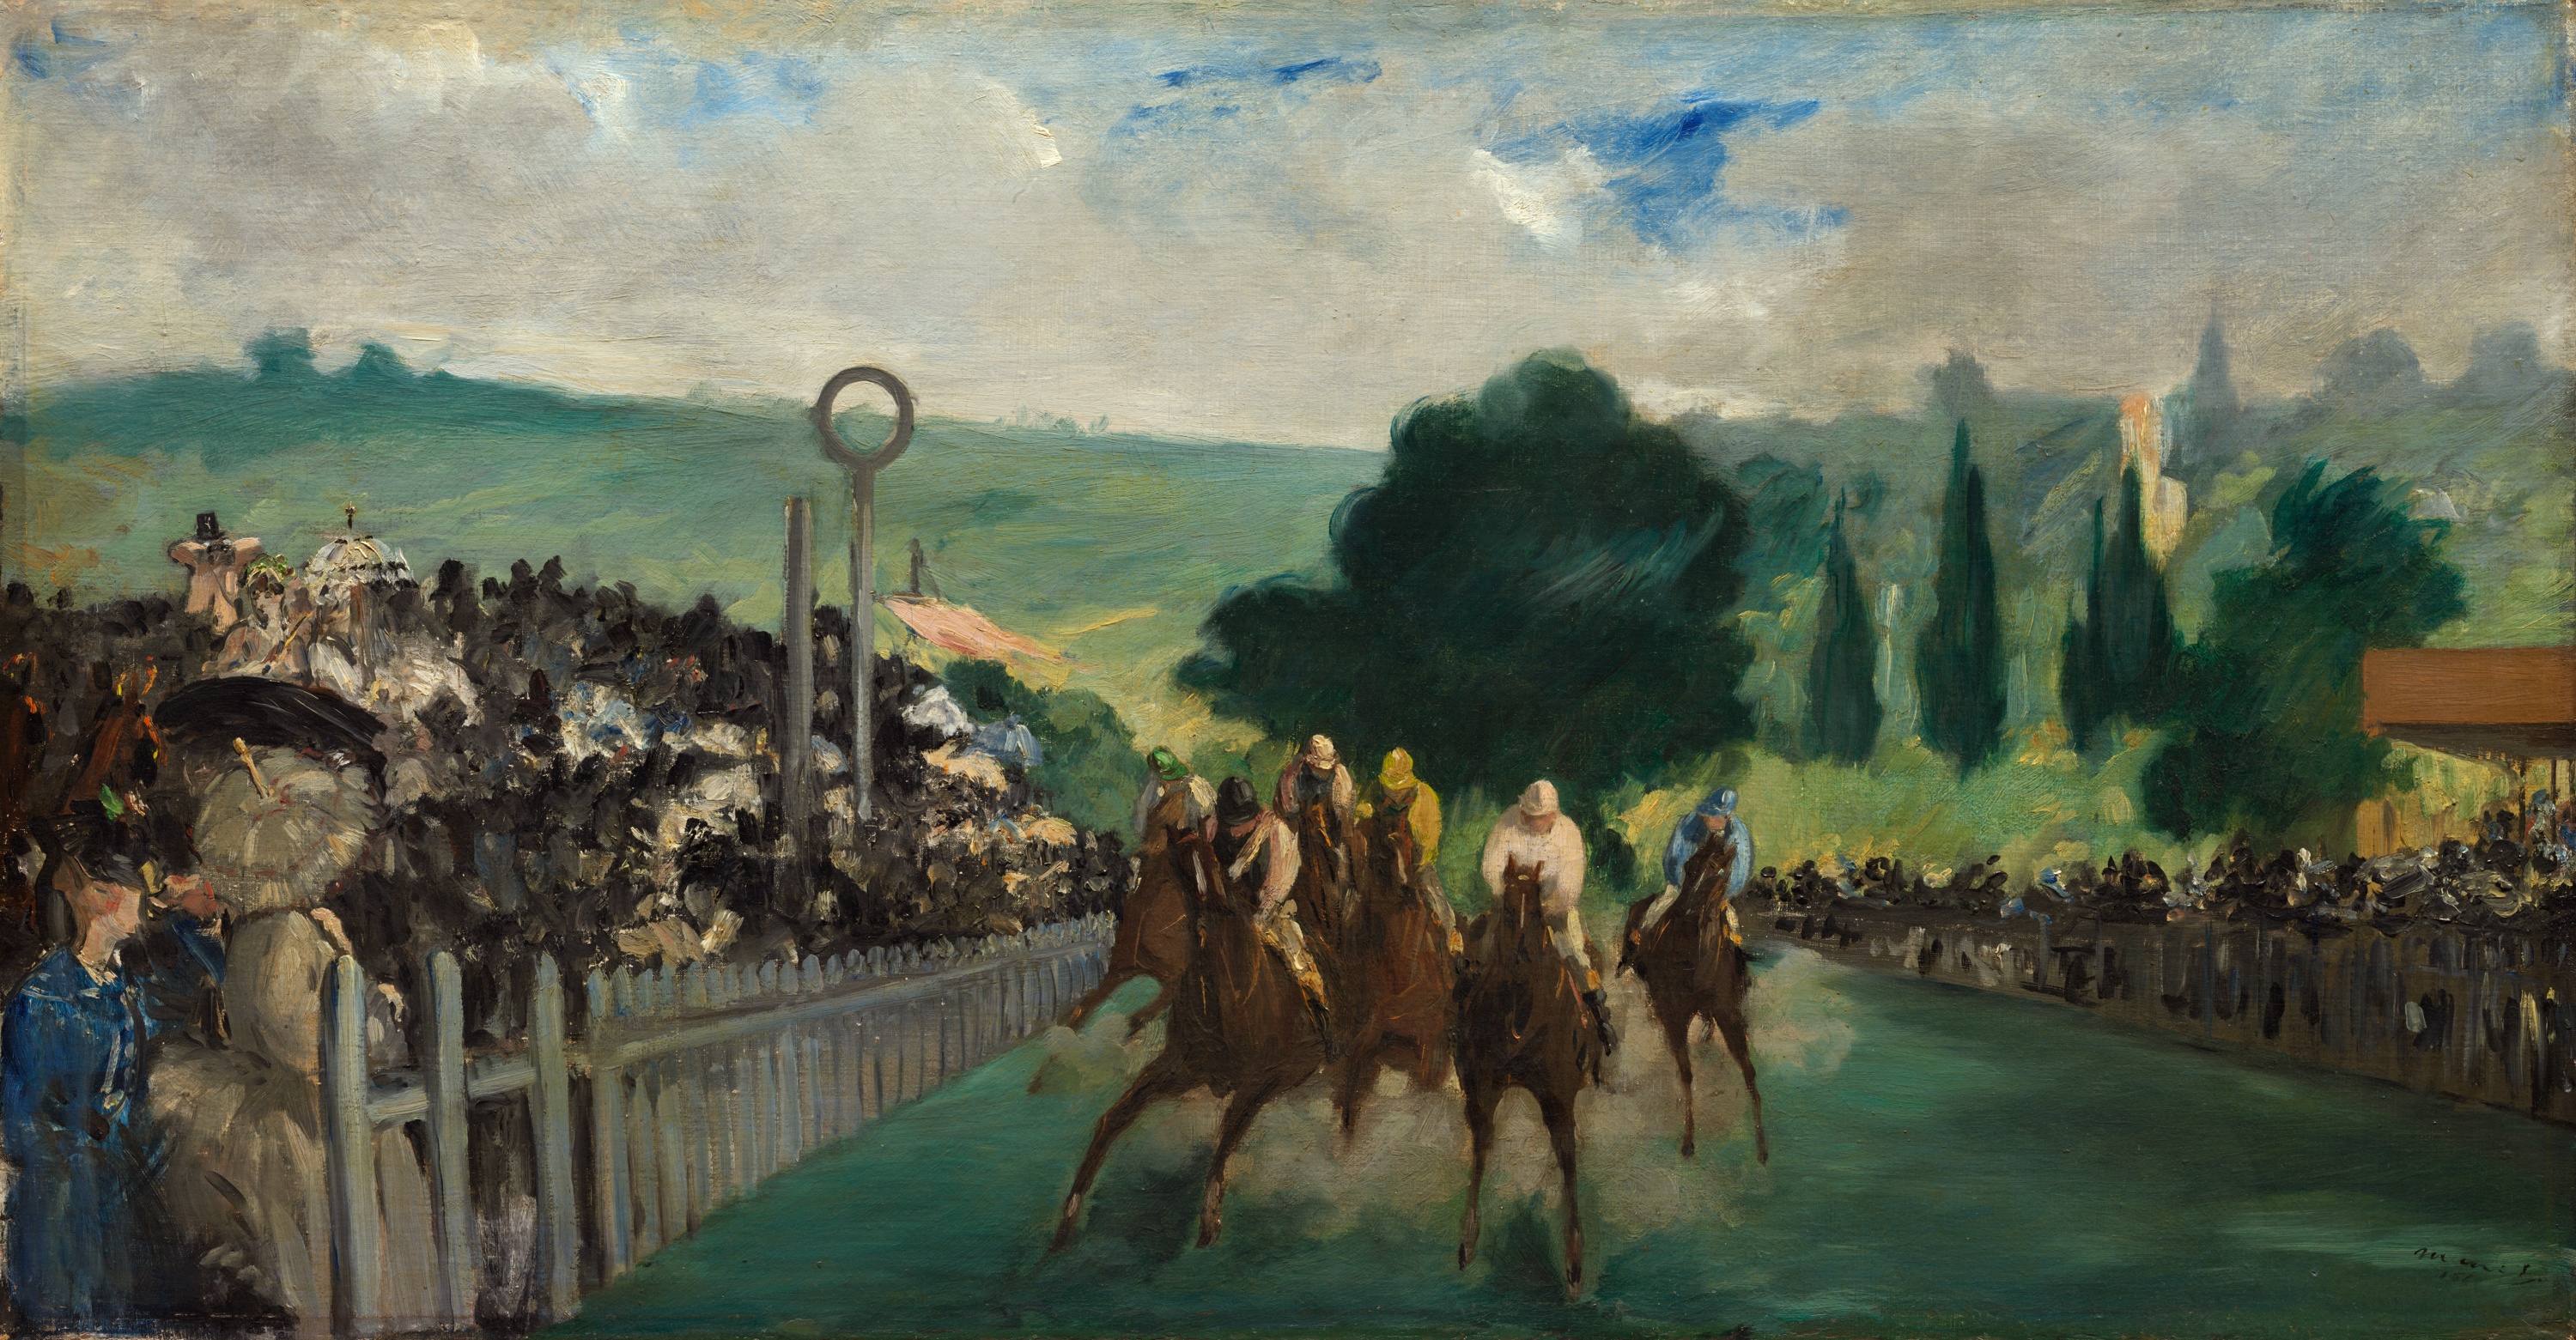 The Painting The Races at Longchamp by Edouard Manet, dated 1866